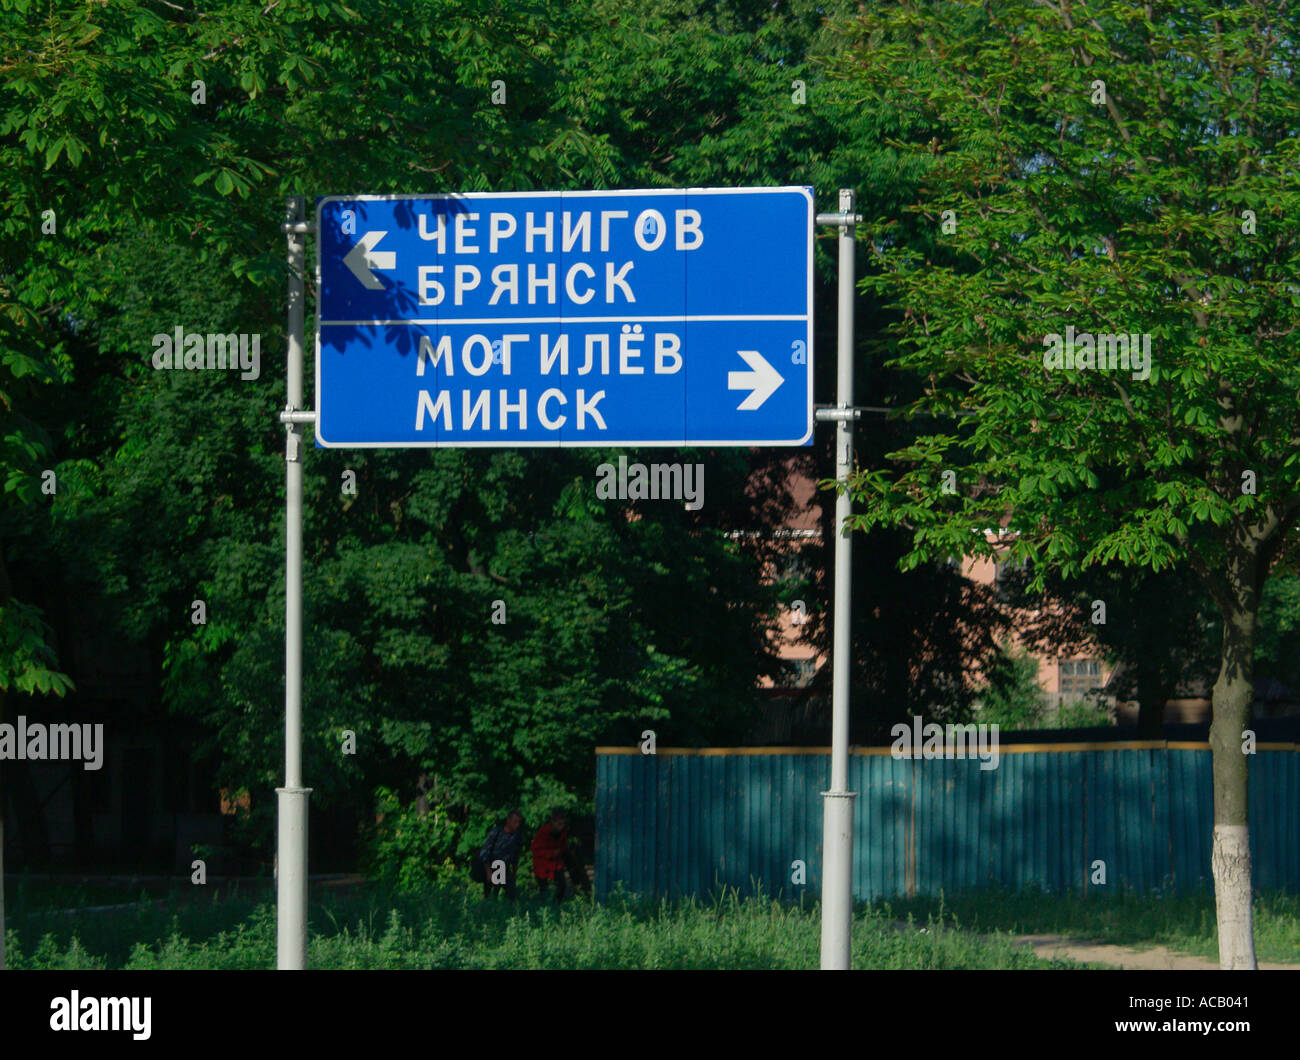 Road direction sign with left and right arrows pointing to different locations in Gomel Belarus Stock Photo